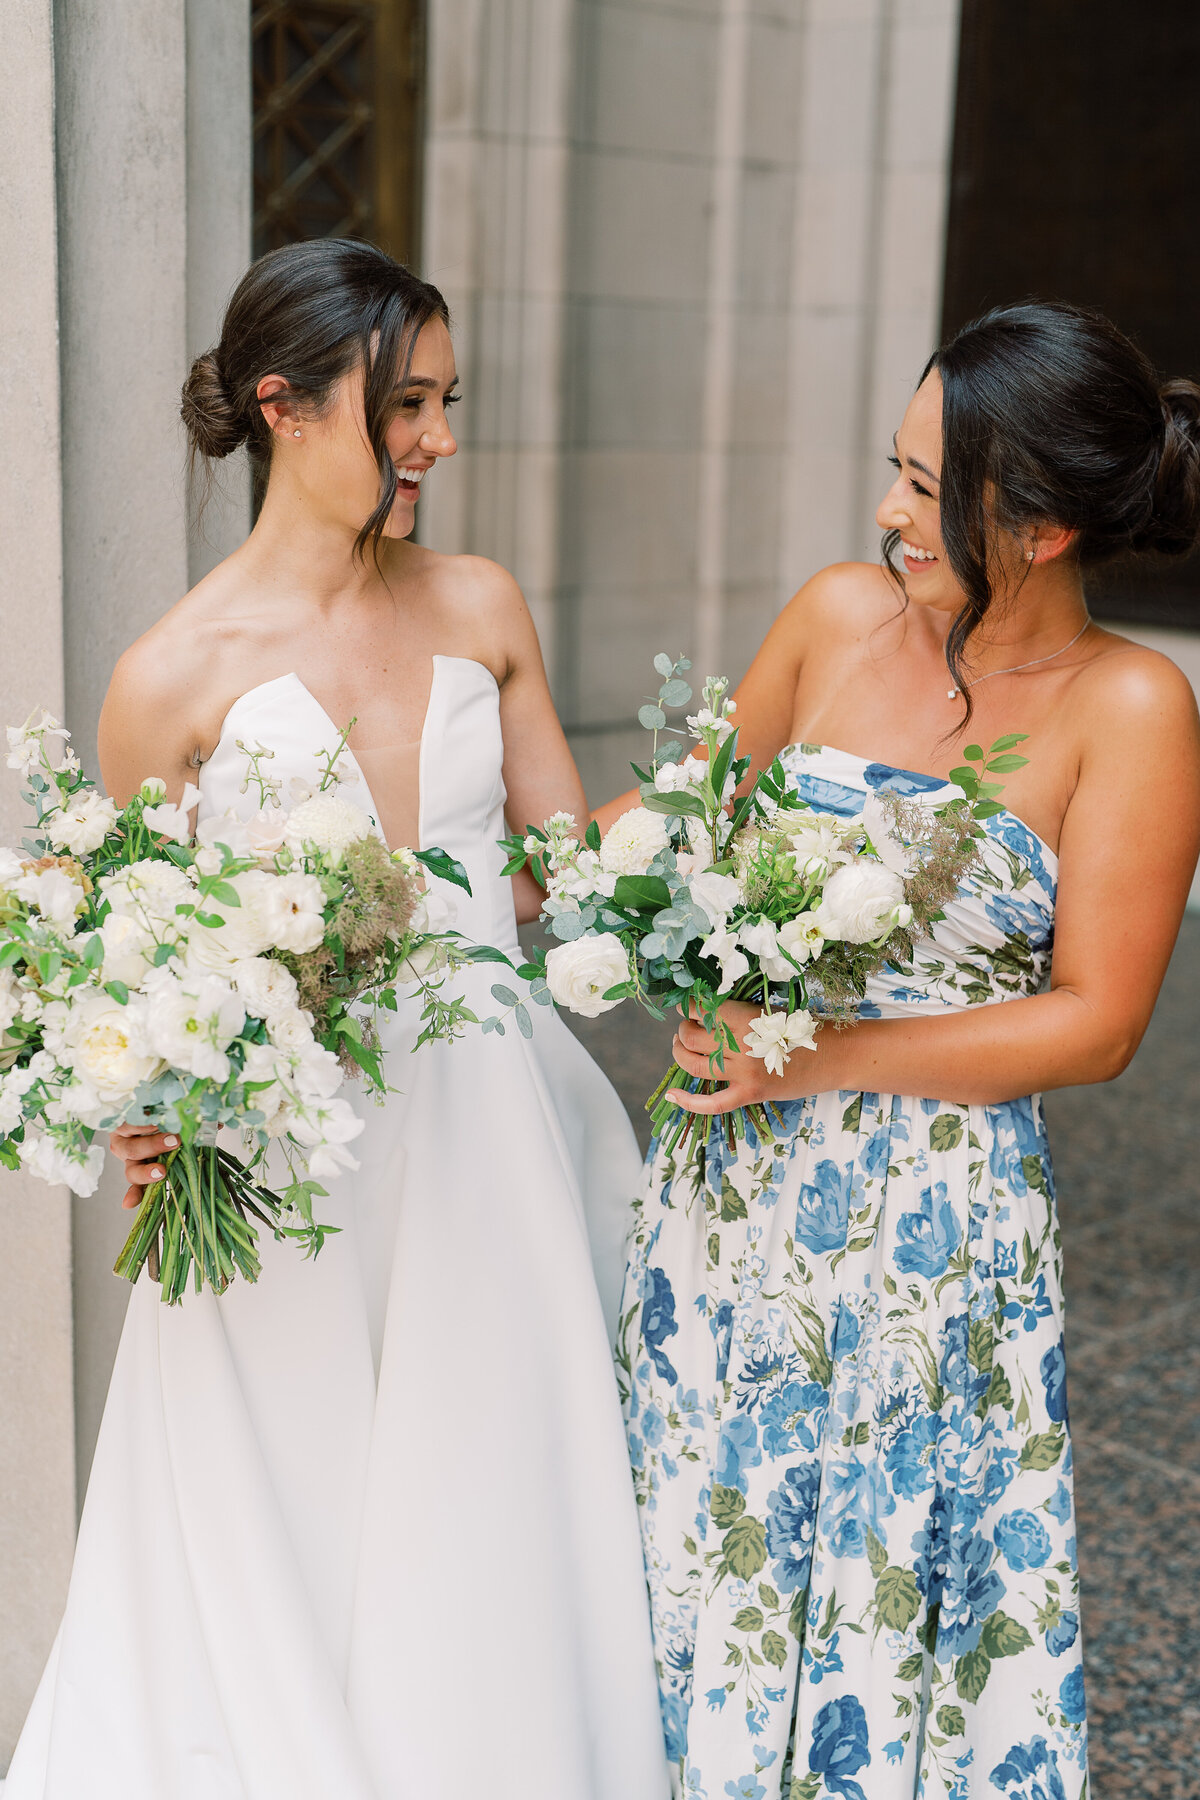 Dainty white and green bridesmaids’ bouquet for a summer wedding in downtown Nashville. Floral colors of white, cream, taupe, and champagne composed of roses, cosmos, zinnias, smoke bush, and ranunculus. Florals paired beautifully with garden-inspired bridesmaids dresses. Design by Rosemary & Finch Floral Design in Nashville, TN.